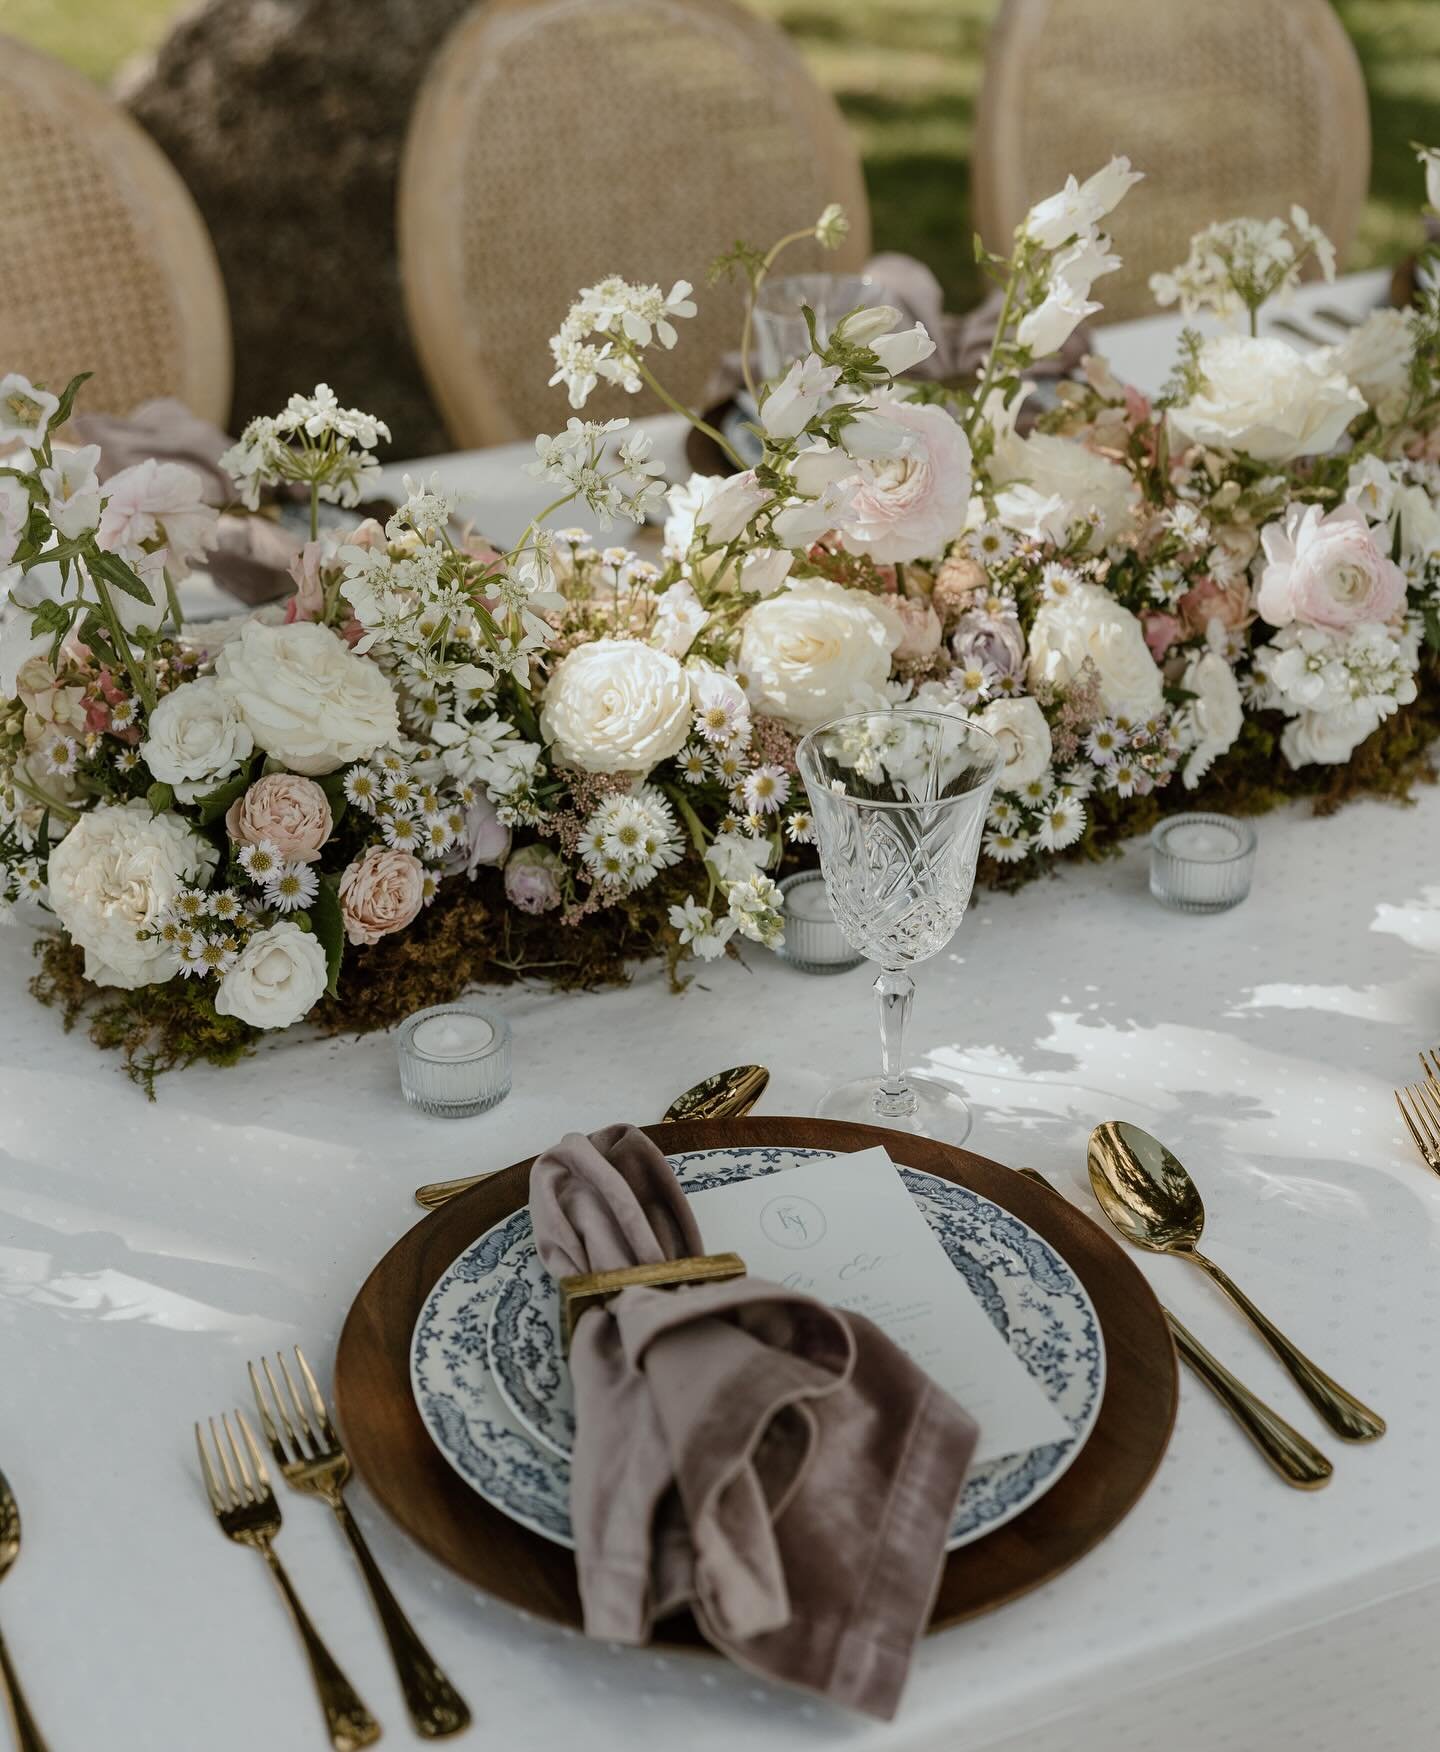 Our new Claire charger plates were such a fun addition to the gorgeous garden party we had at @stone_crossing yesterday! 

VENDOR TEAM
Planning/Design: @steeleoaksevents 
Venue: @stone_crossing 
Photographer: @madicurlphoto 
Florist: @thebonnievine 
